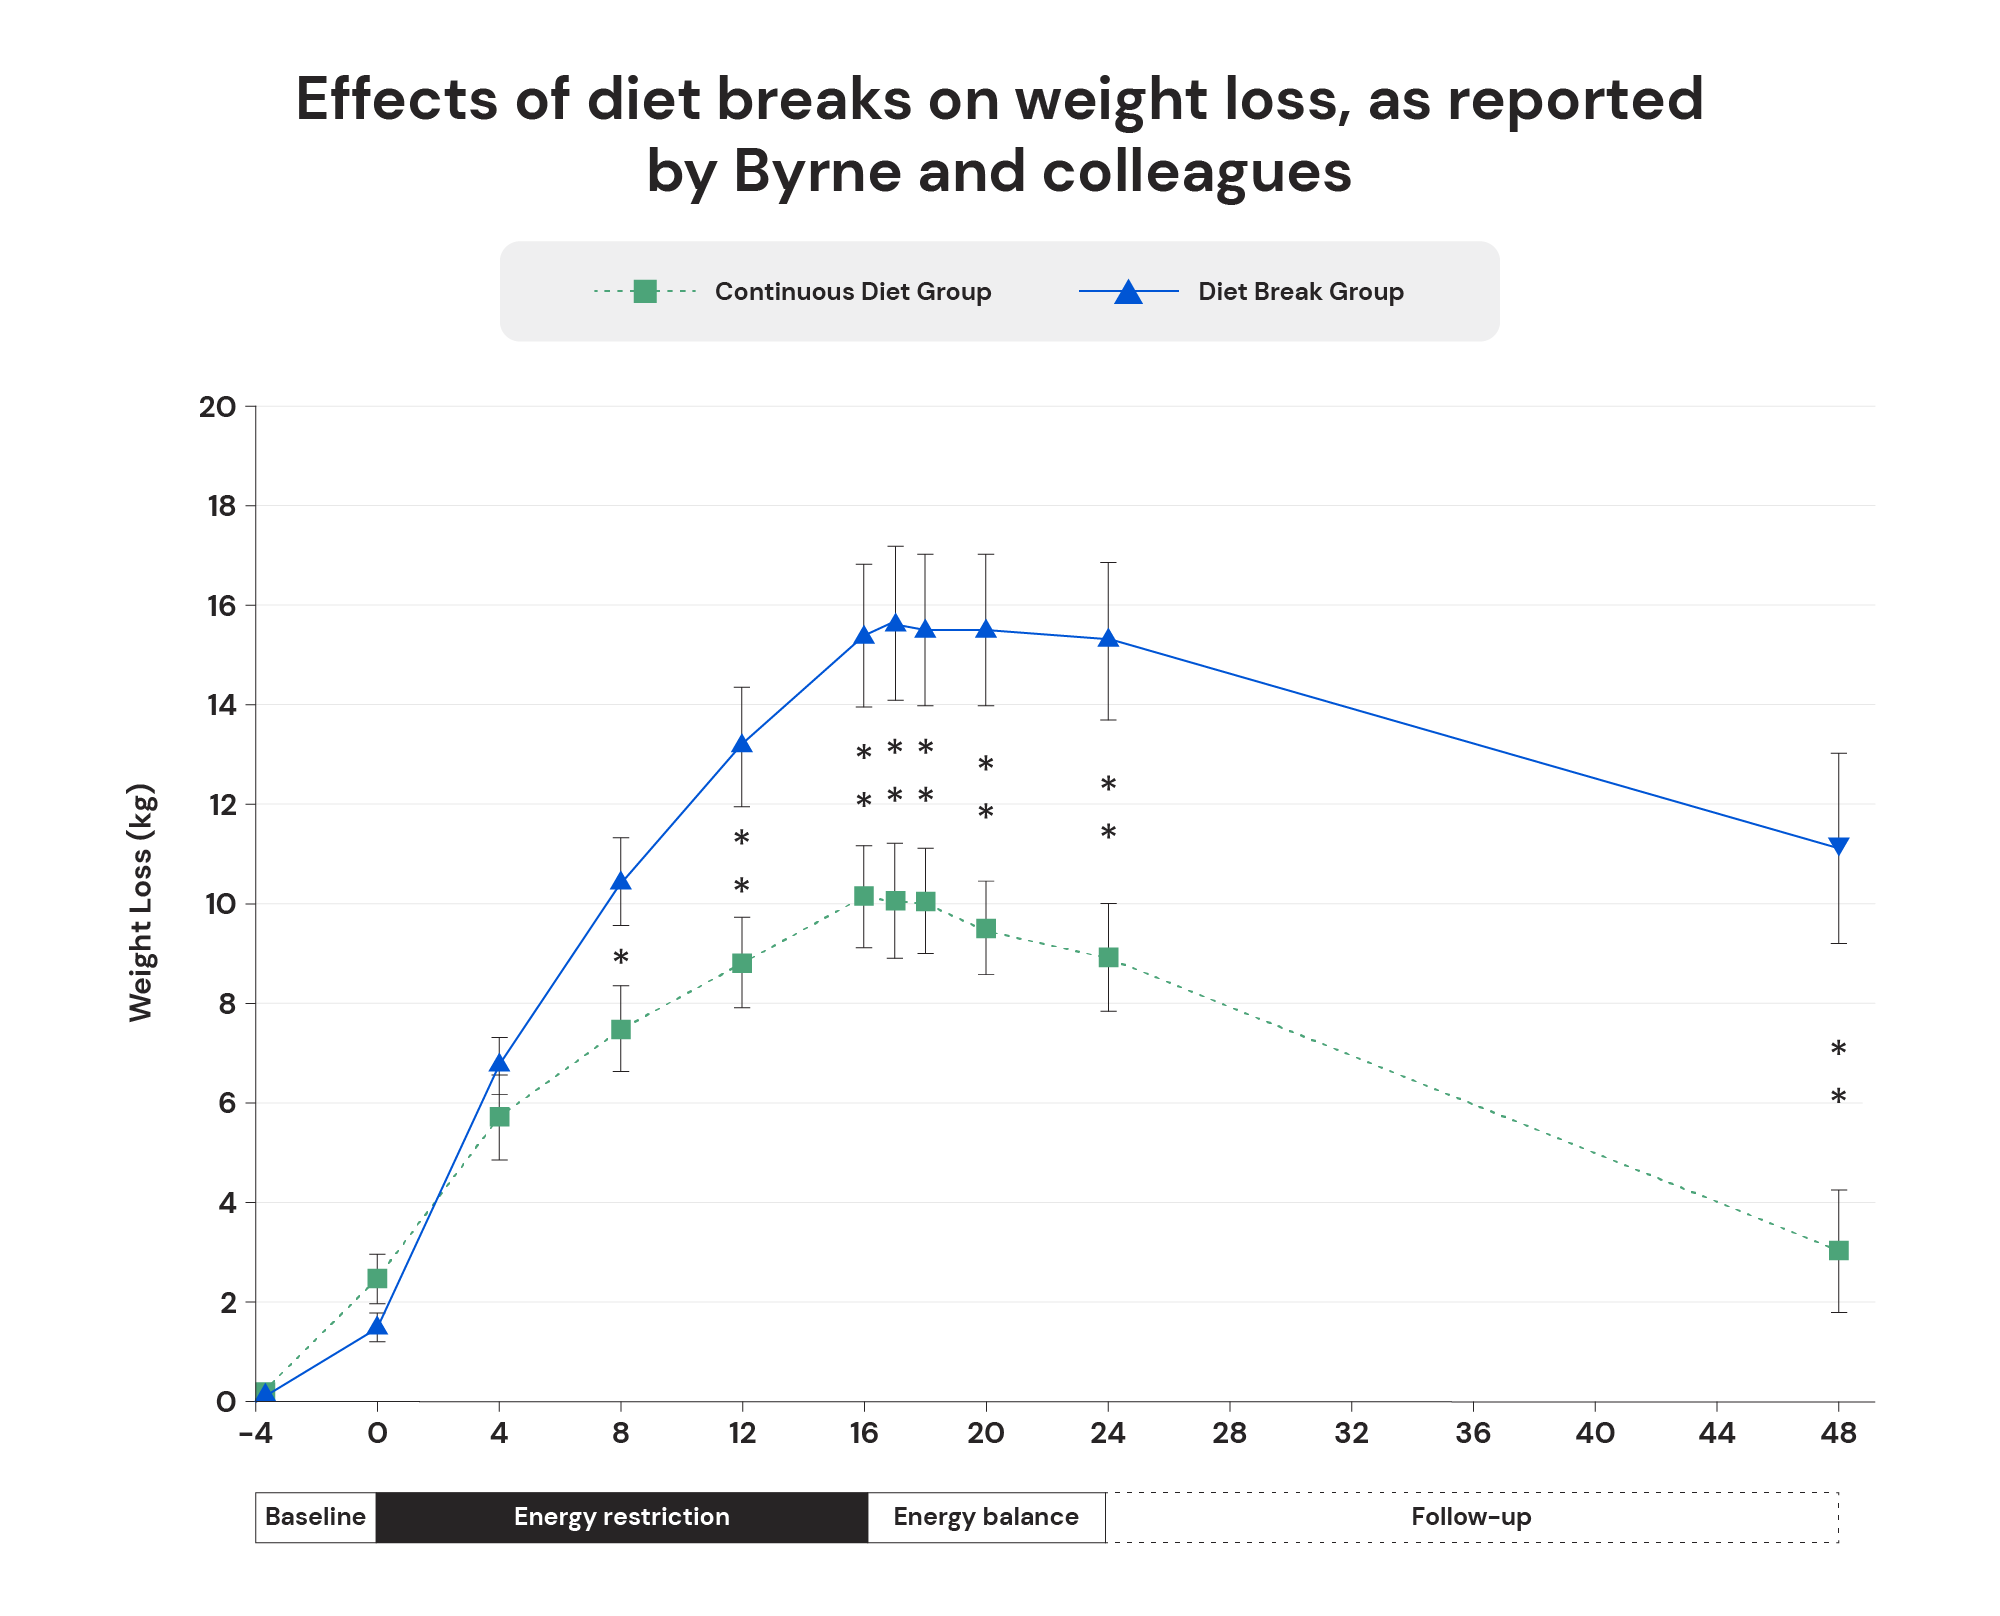 Effects of diet breaks on weight loss, as reported by Byrne and colleagues